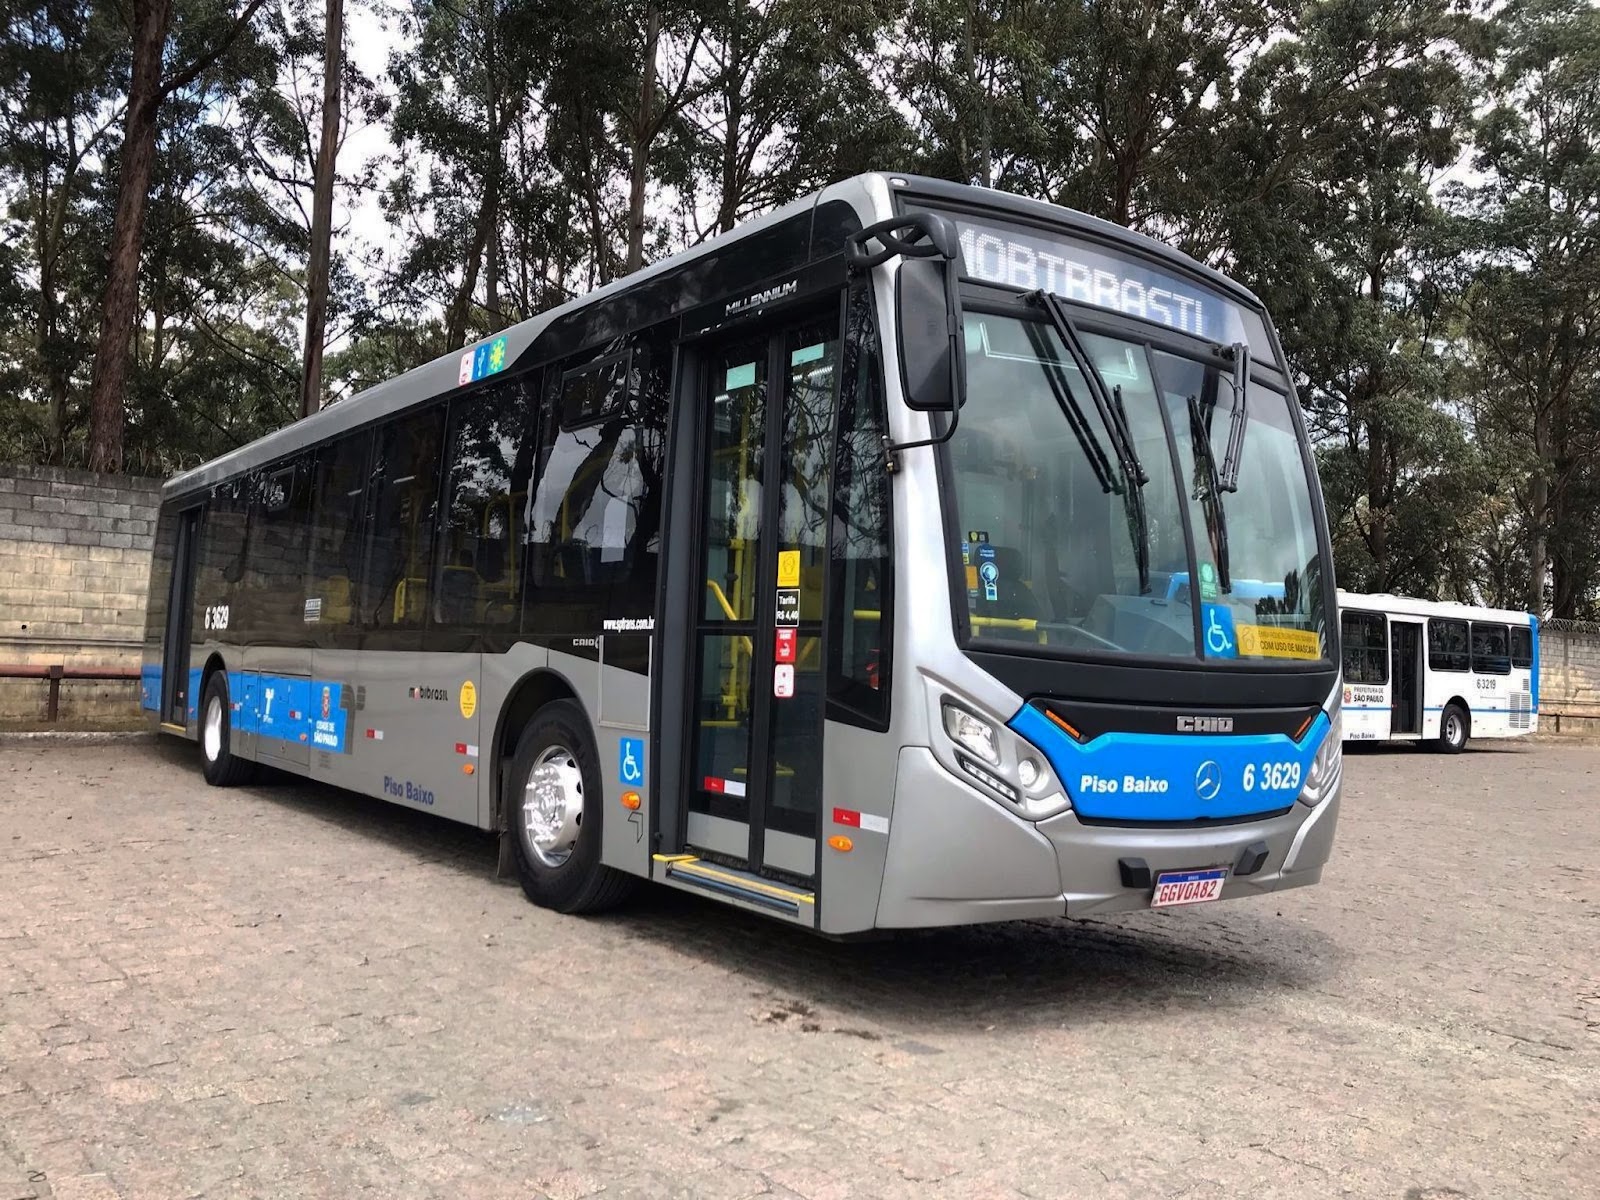 A bus from MobiBrasil’s São Paulo fleet, which transports 10.8 million passengers per month as part of SPTrans system, Latin America’s largest bus system.